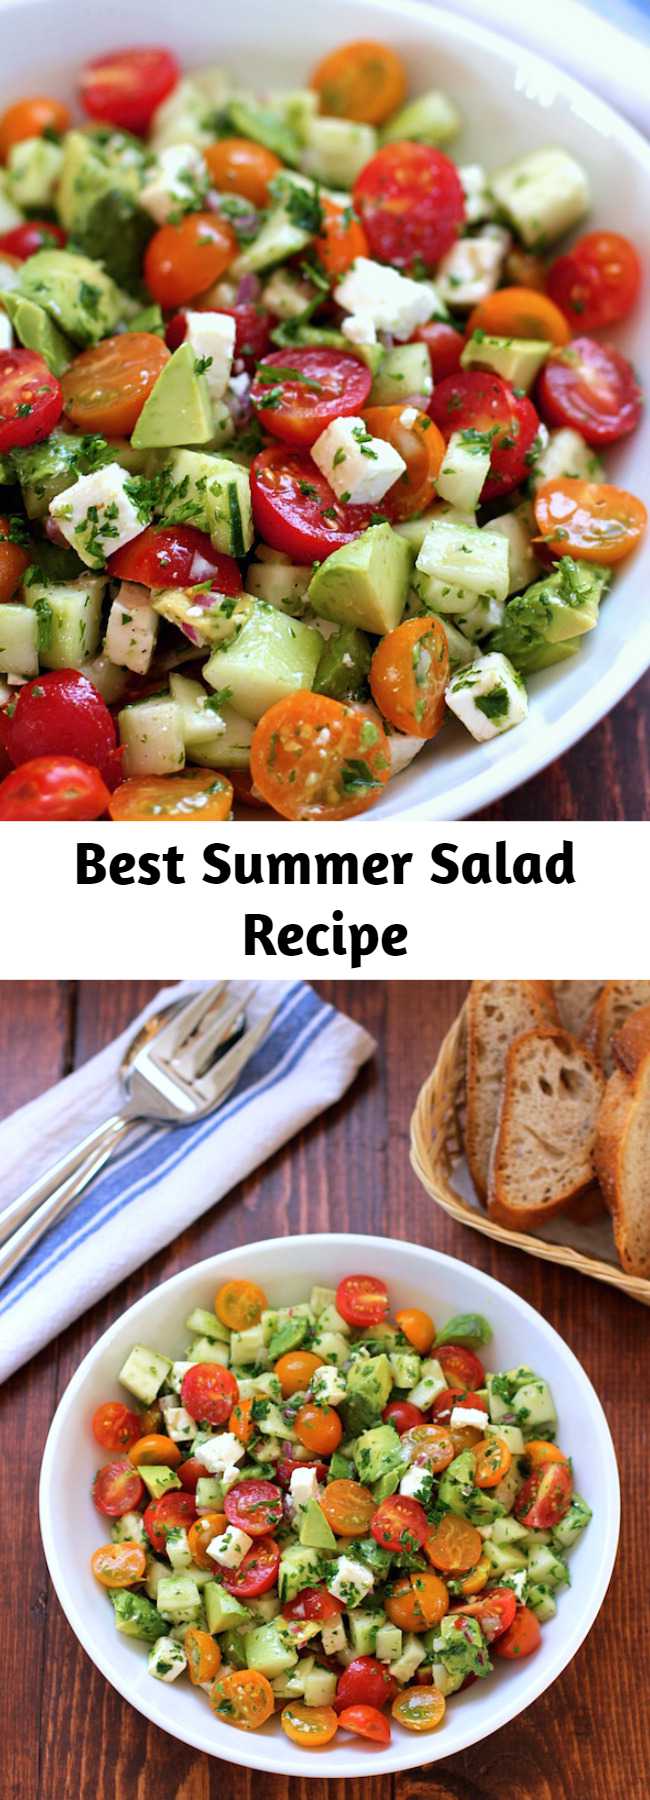 This tomato, cucumber, avocado salad is an easy, healthy, flavorful summer salad.  It’s crunchy, fresh and simple to make.  It’s a family favorite and ready in less than 15 minutes.